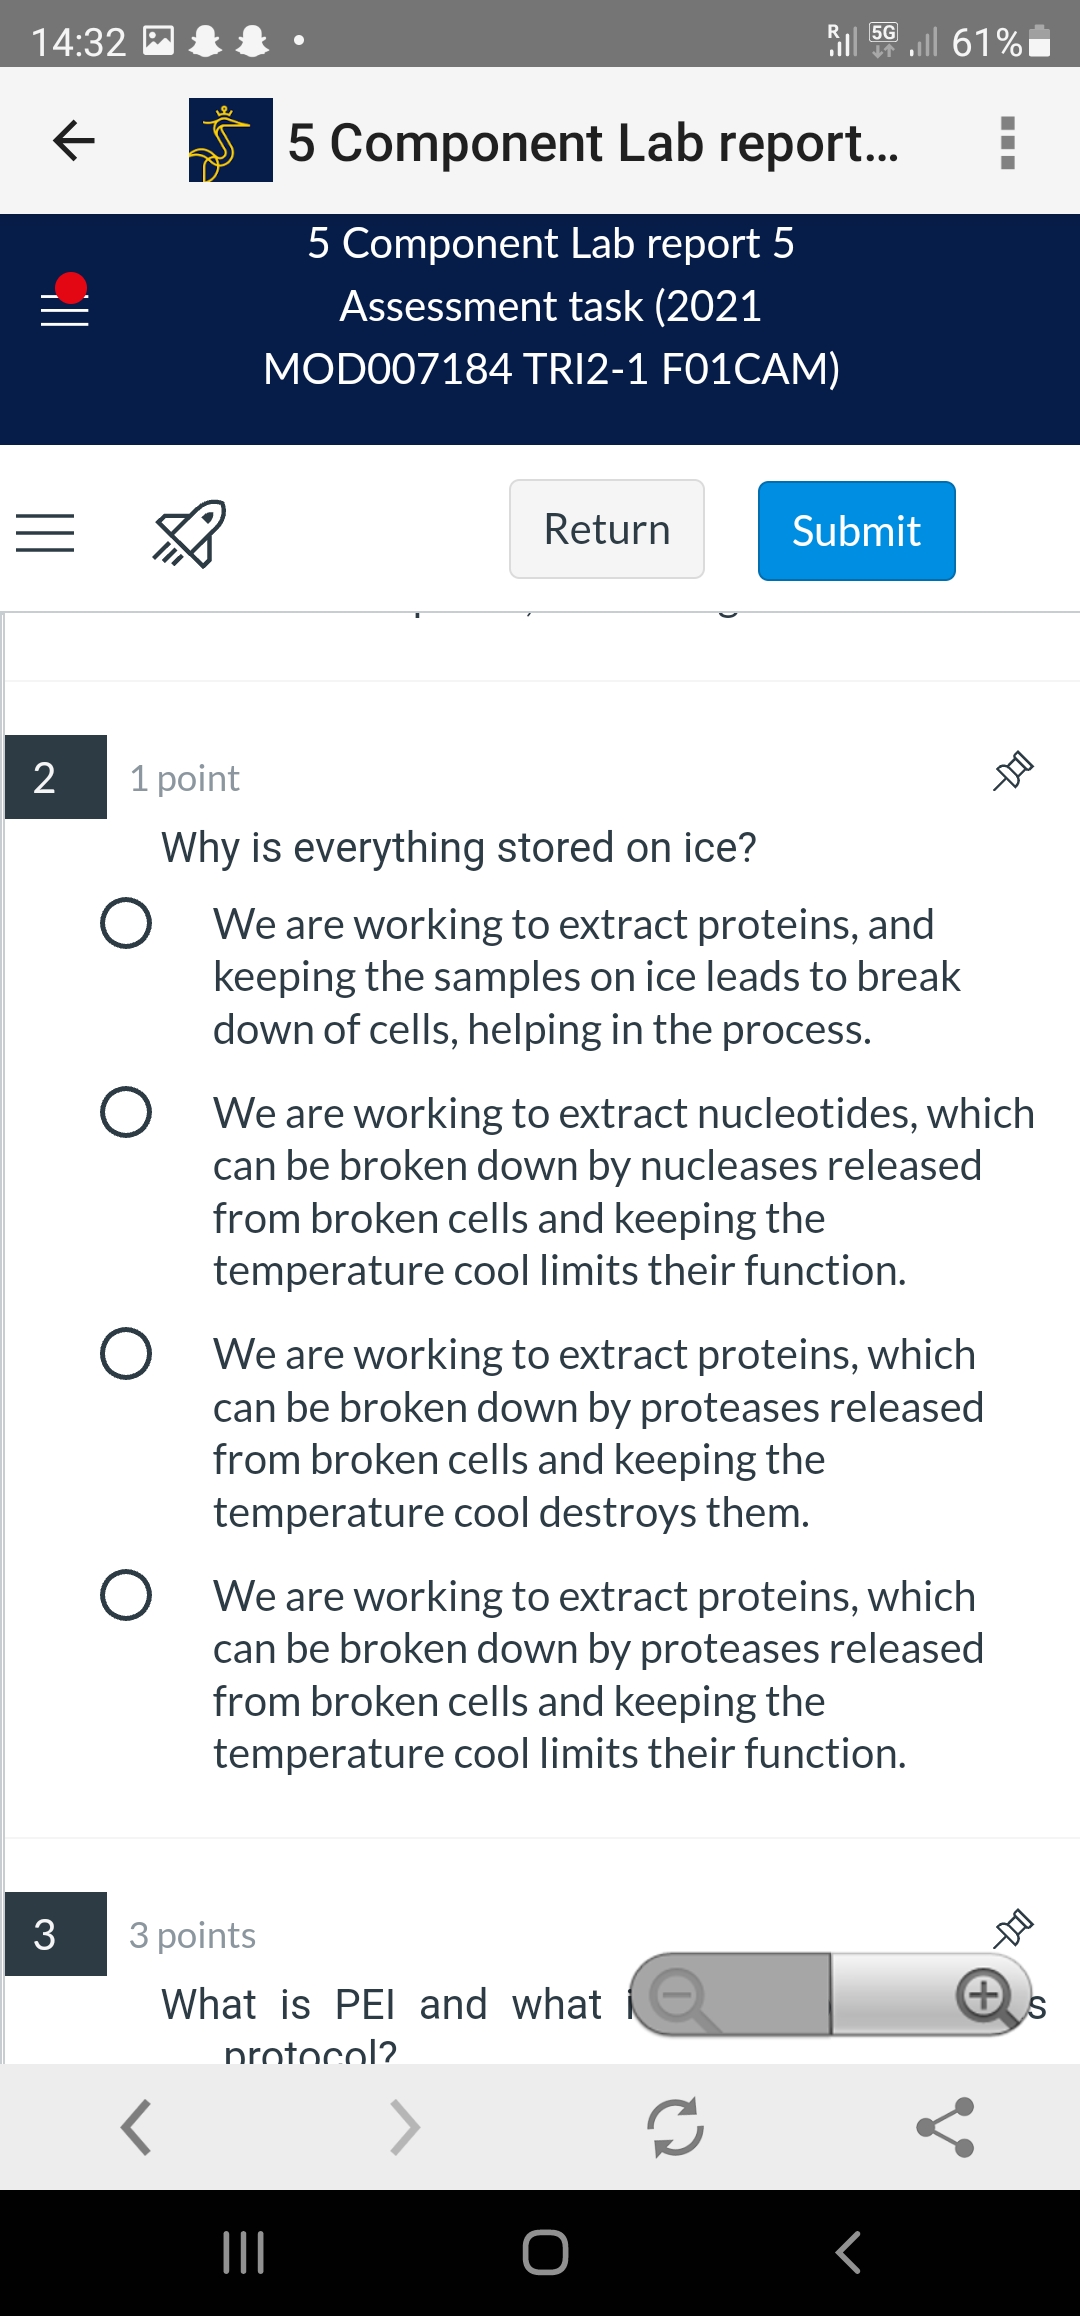 5G
14:32
ll 61%
5 Component Lab report..
5 Component Lab report 5
Assessment task (2021
MODO07184 TRI2-1 F01CAM)
Return
Submit
2
1 point
Why is everything stored on ice?
O We are working to extract proteins, and
keeping the samples on ice leads to break
down of cells, helping in the process.
O We are working to extract nucleotides, which
can be broken down by nucleases released
from broken cells and keeping the
temperature cool limits their function.
We are working to extract proteins, which
can be broken down by proteases released
from broken cells and keeping the
temperature cool destroys them.
O We are working to extract proteins, which
can be broken down by proteases released
from broken cells and keeping the
temperature cool limits their function.
3
3 points
What is PEI and what
nrotocol?.
